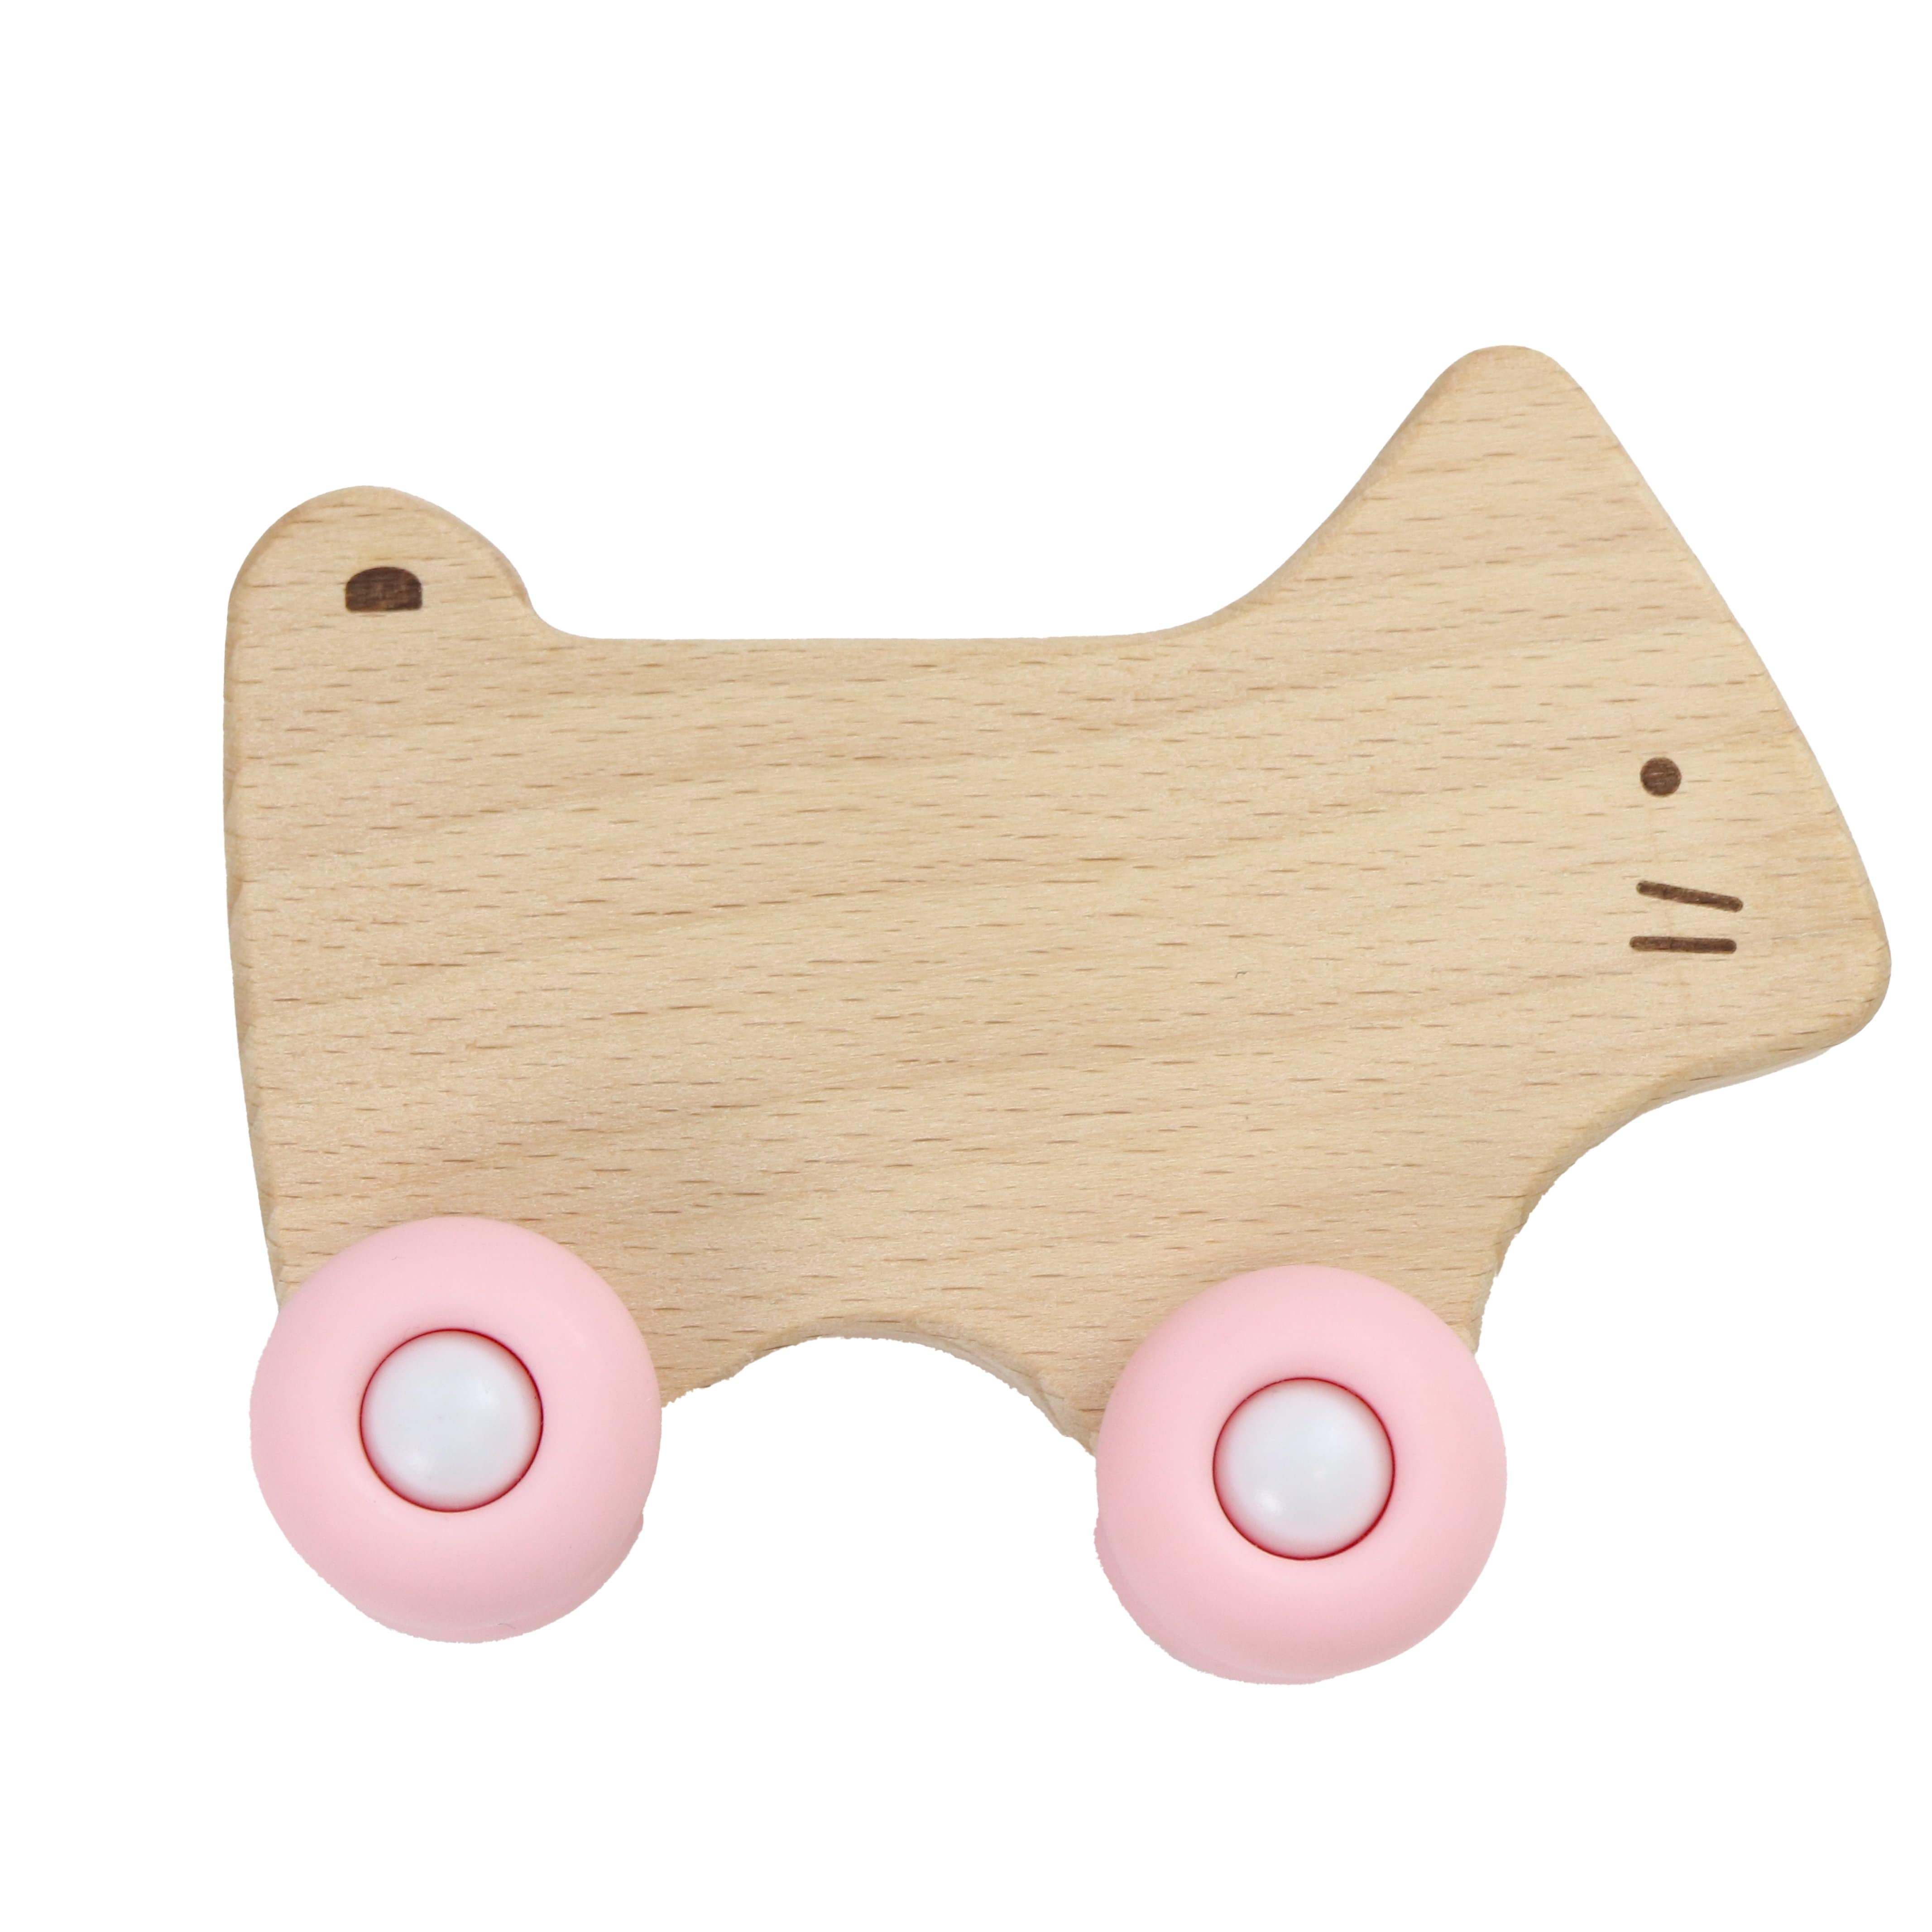 PLL - Goosewaddle + Pello Goosewaddle + Pello Silicone + Wood Teether Kitty - Little Miss Muffin Children & Home